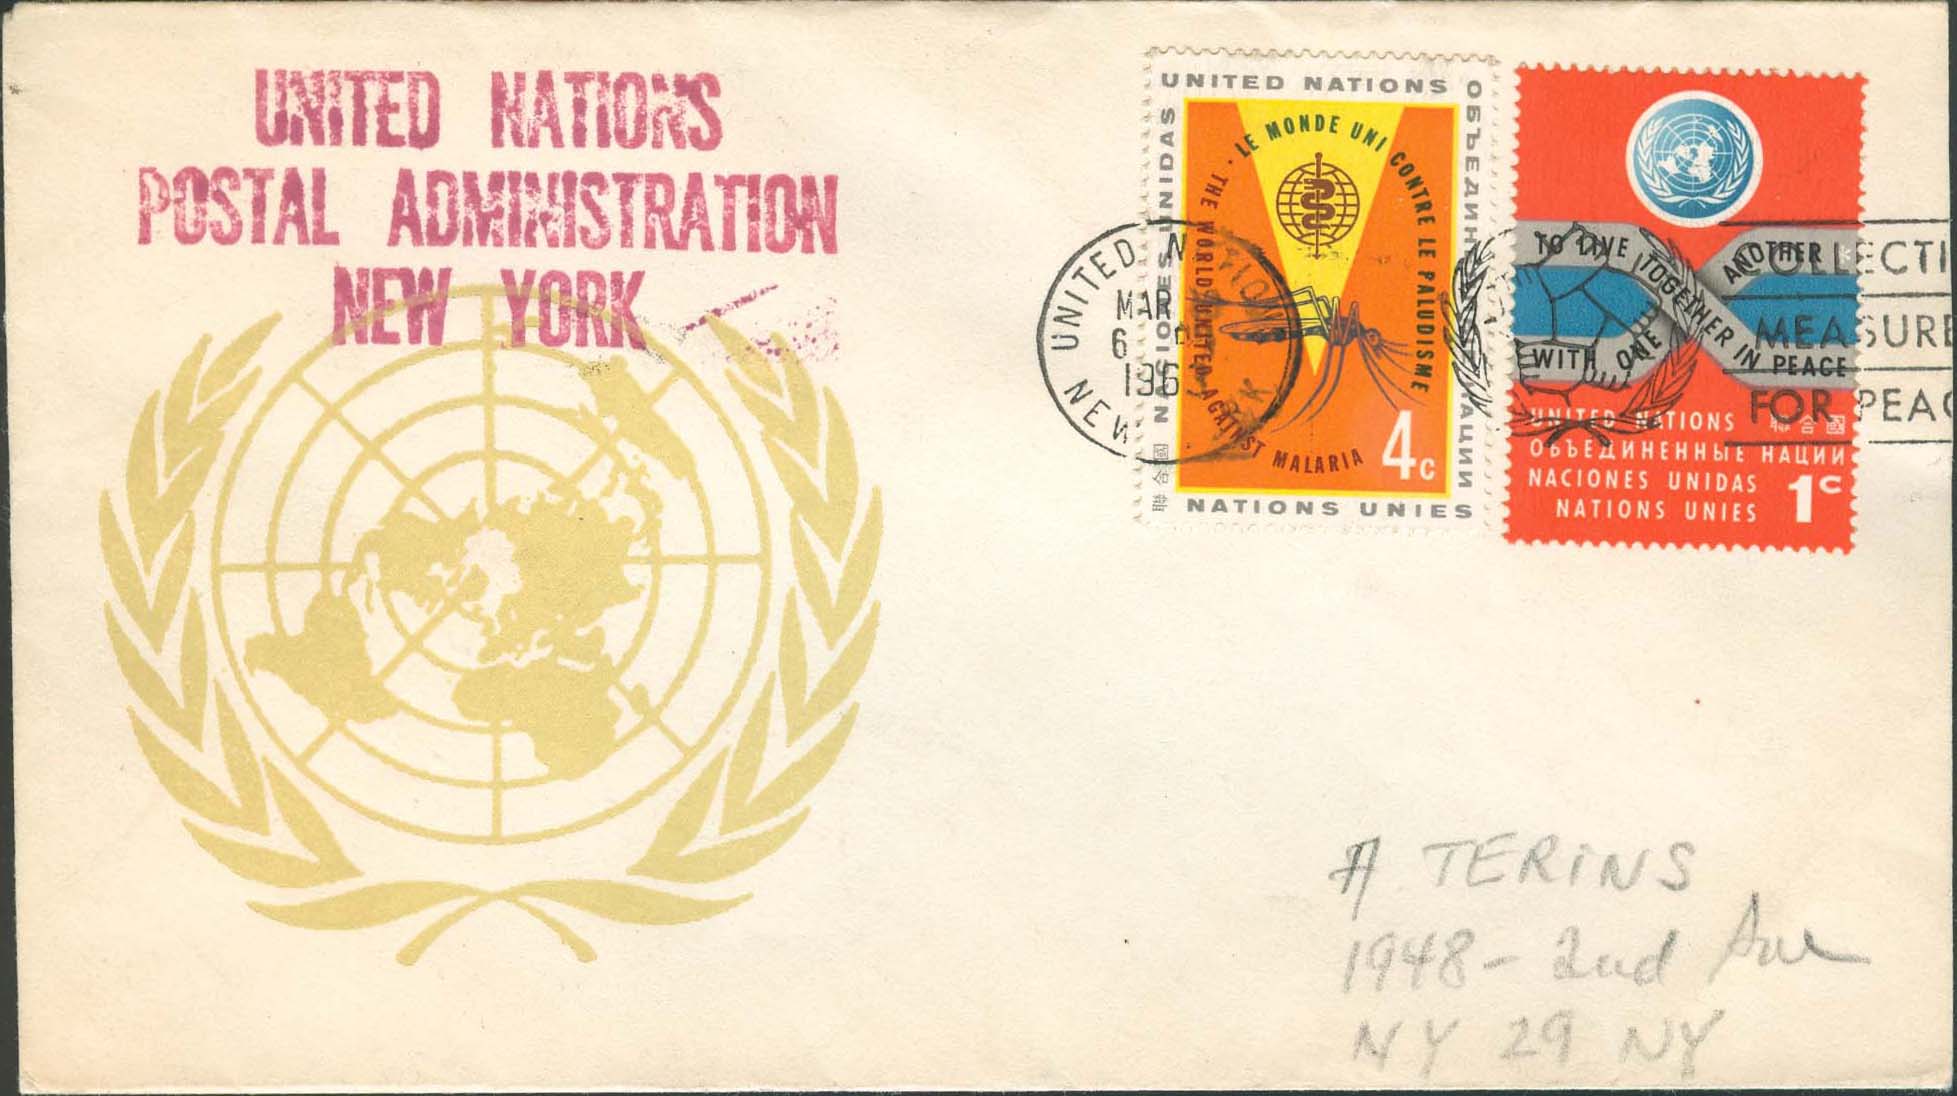 Scott 102 2nd print - March 18 or 19, 1963 Machine slogan Collective Measures for Peace UN Postal Administration rubber stamped return address